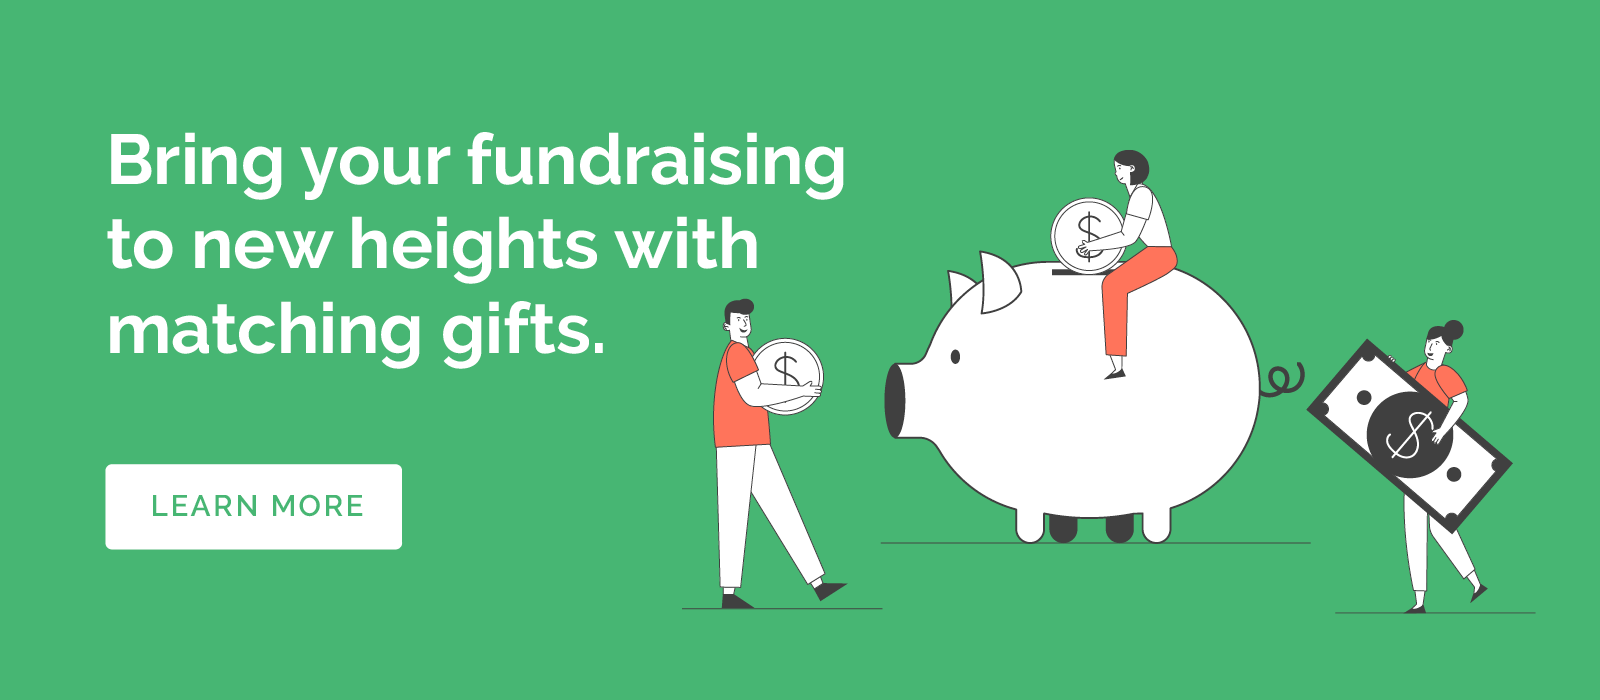 Supercharge your peer-to-peer fundraising with matching gifts.